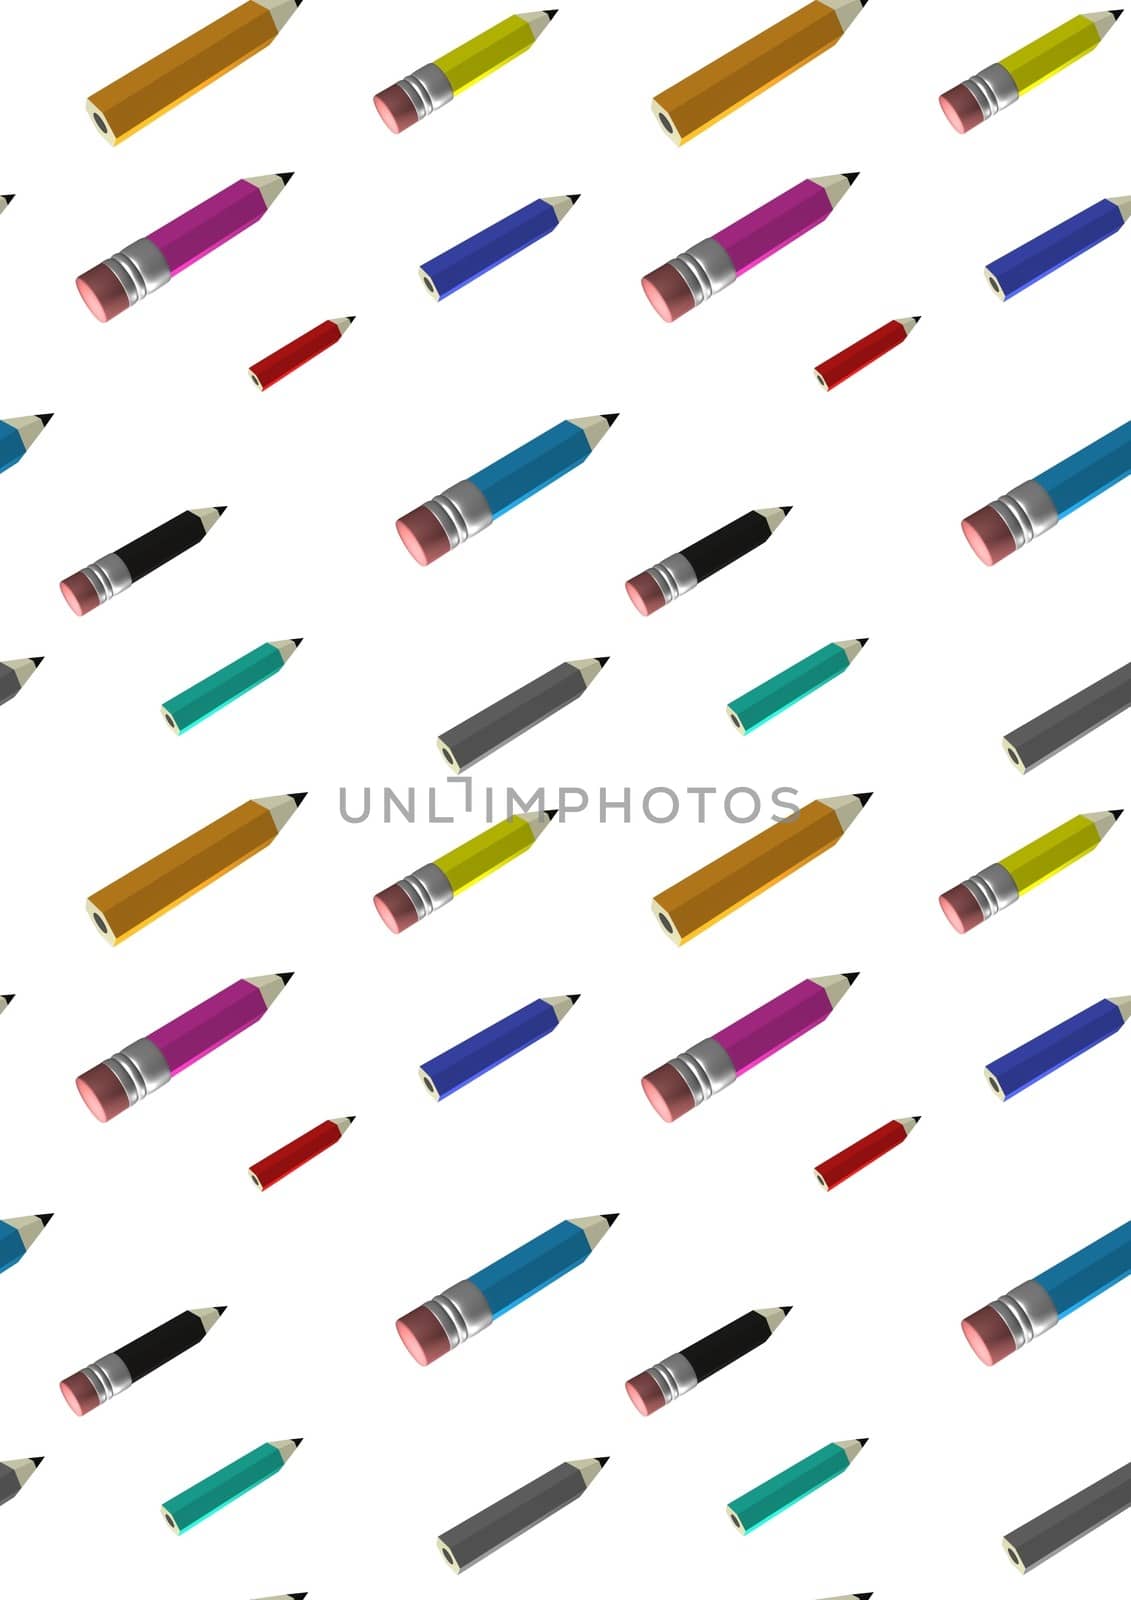 Seamless background containing many colorful pencils